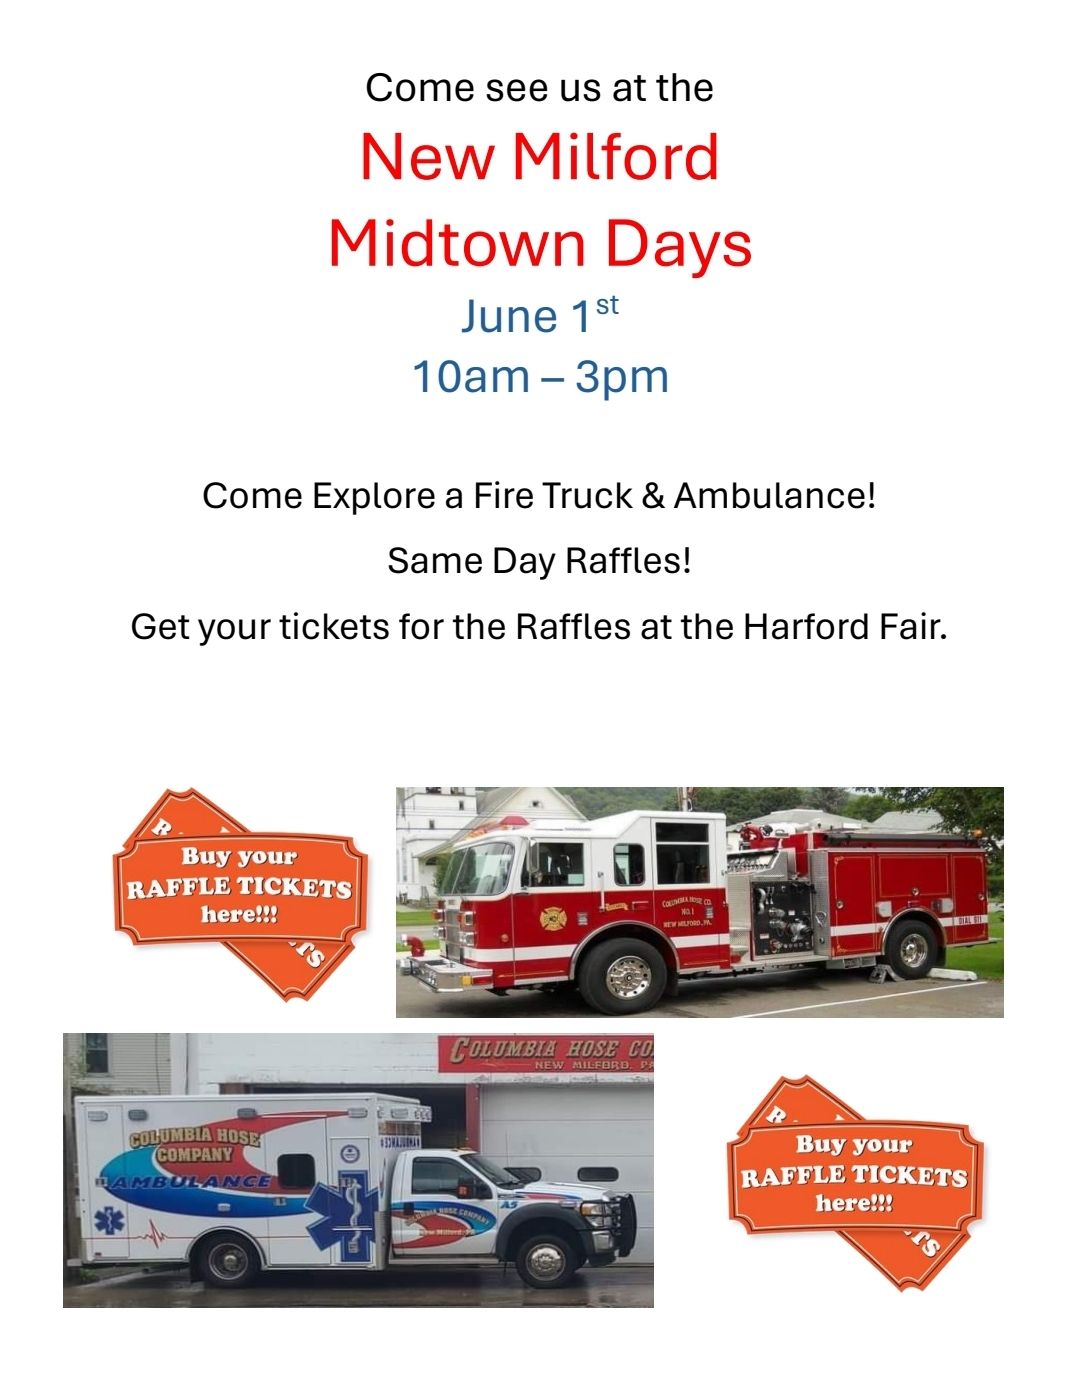 Come see us at the New Milford Midtown Days